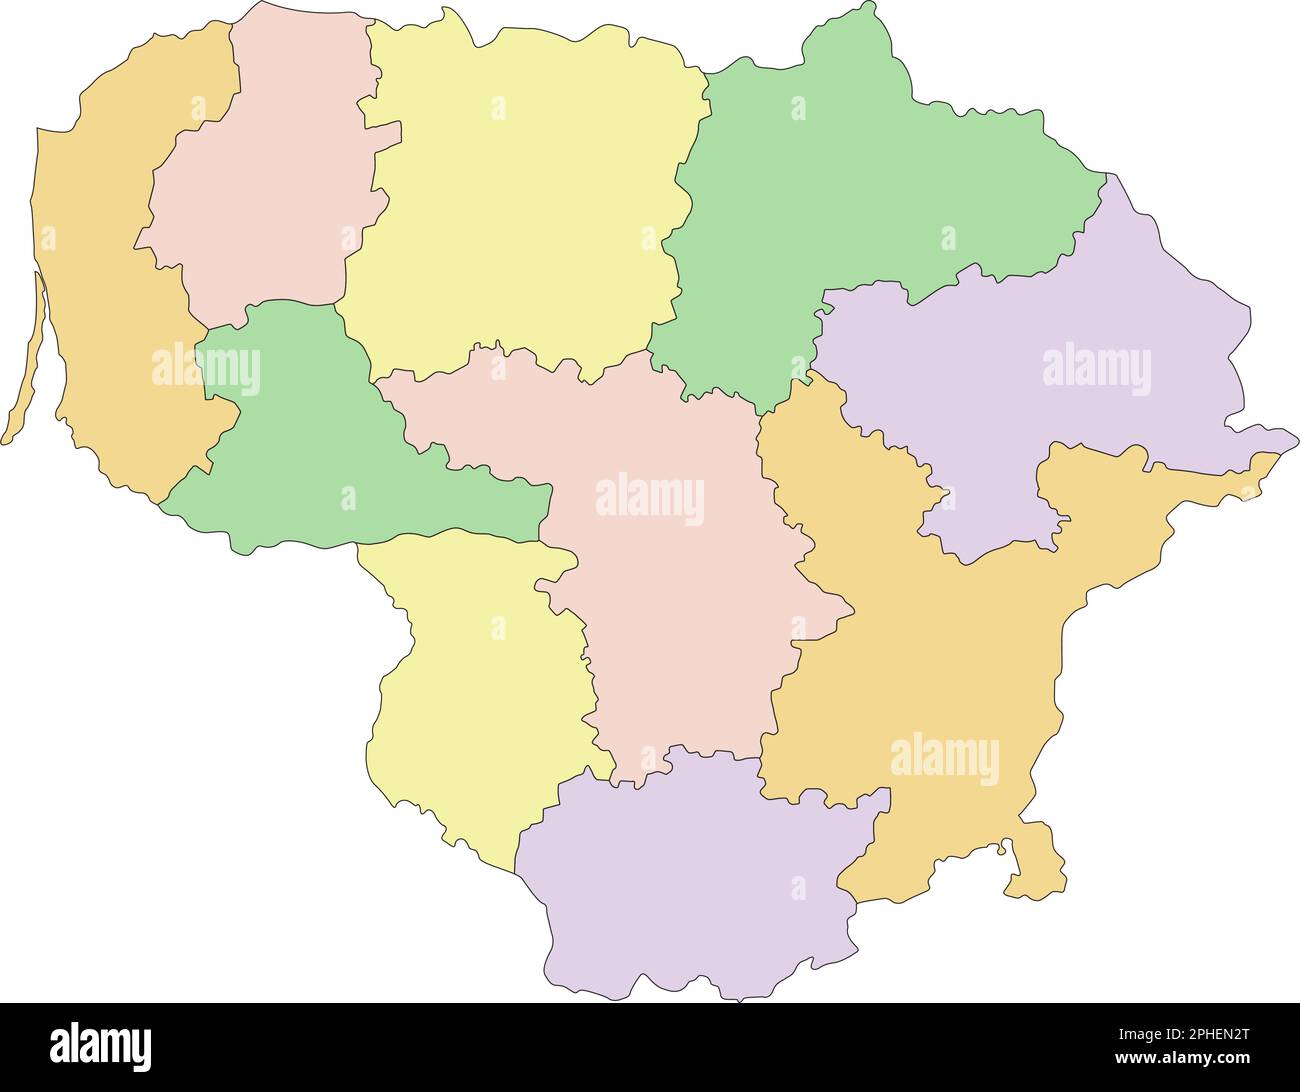 Lithuania - Highly detailed editable political map. Stock Vector